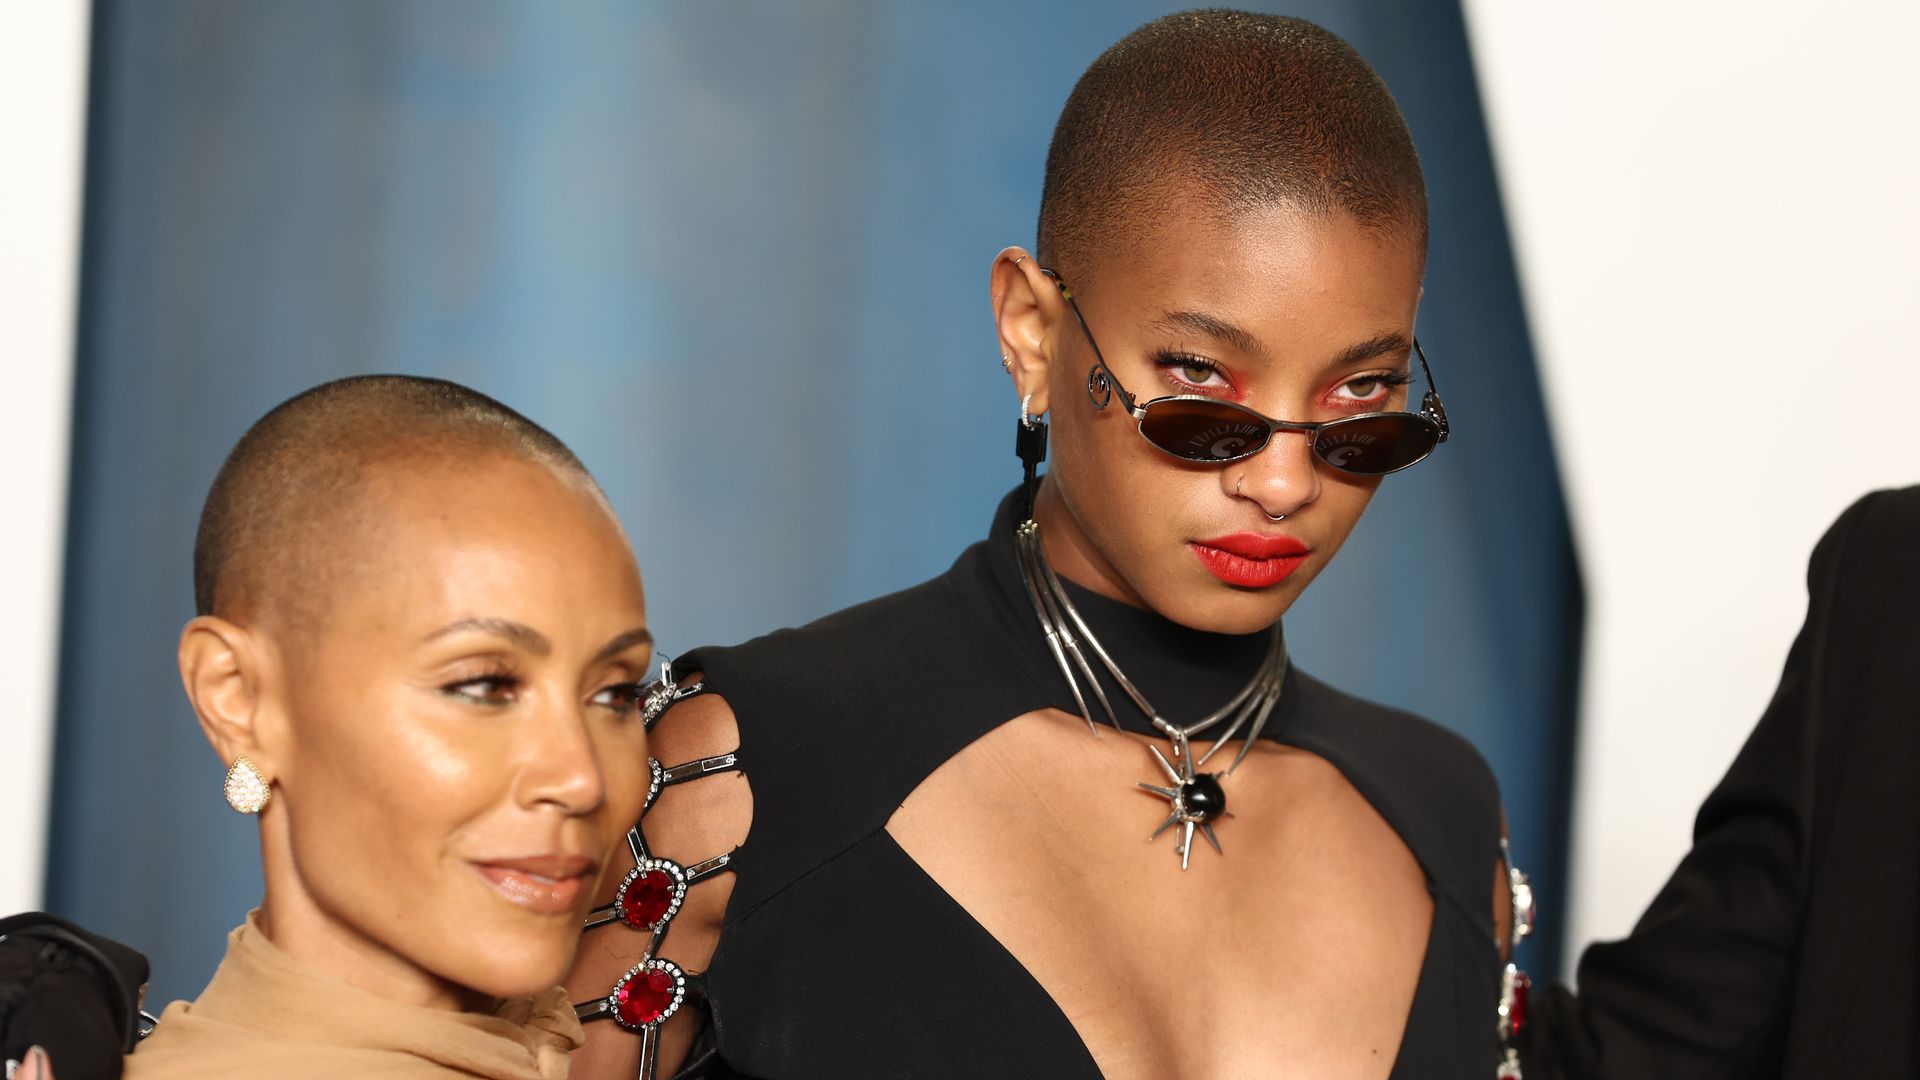 Willow and her mom Jada Pinkett Smith at the 2022 Vanity Fair Oscar Party